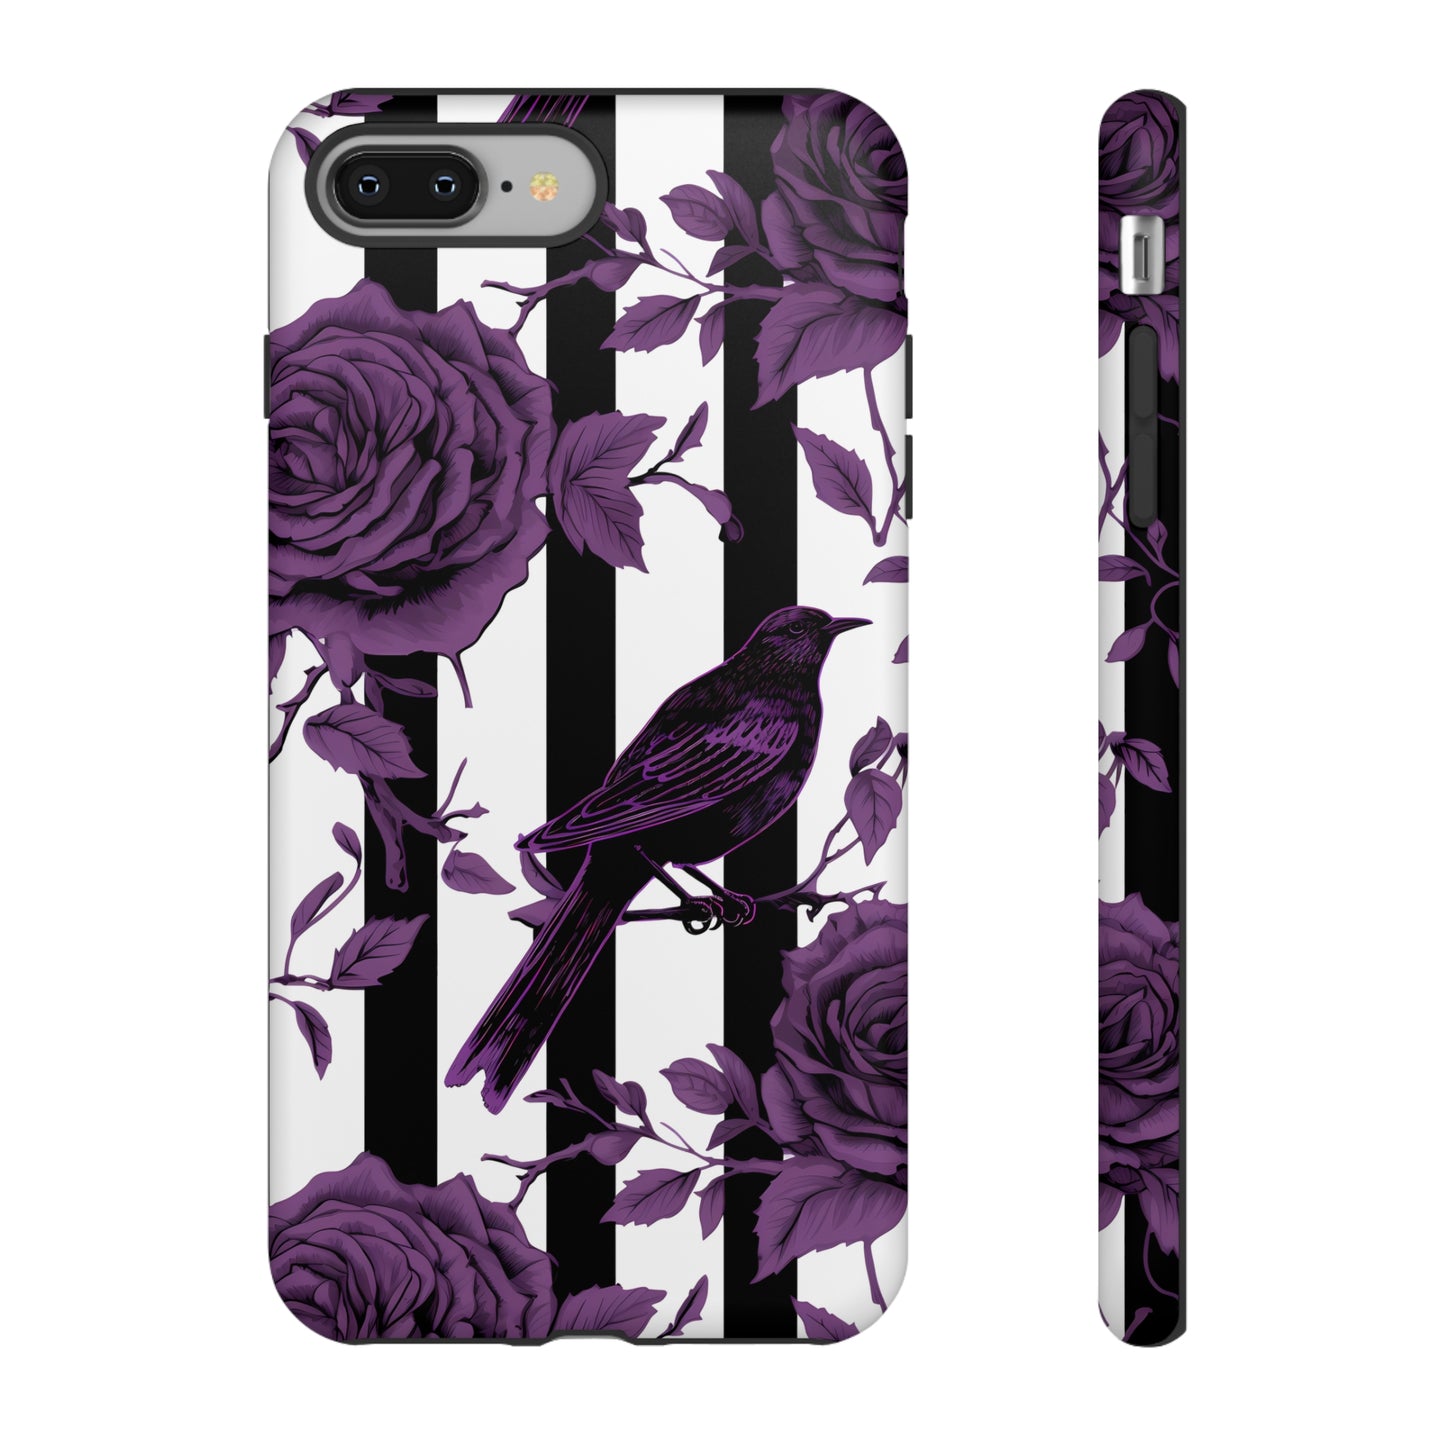 Striped Crows and Roses Tough Cases for iPhone Samsung Google PhonesPhone CaseVTZdesignsiPhone 8 PlusMatteAccessoriescrowsGlossy